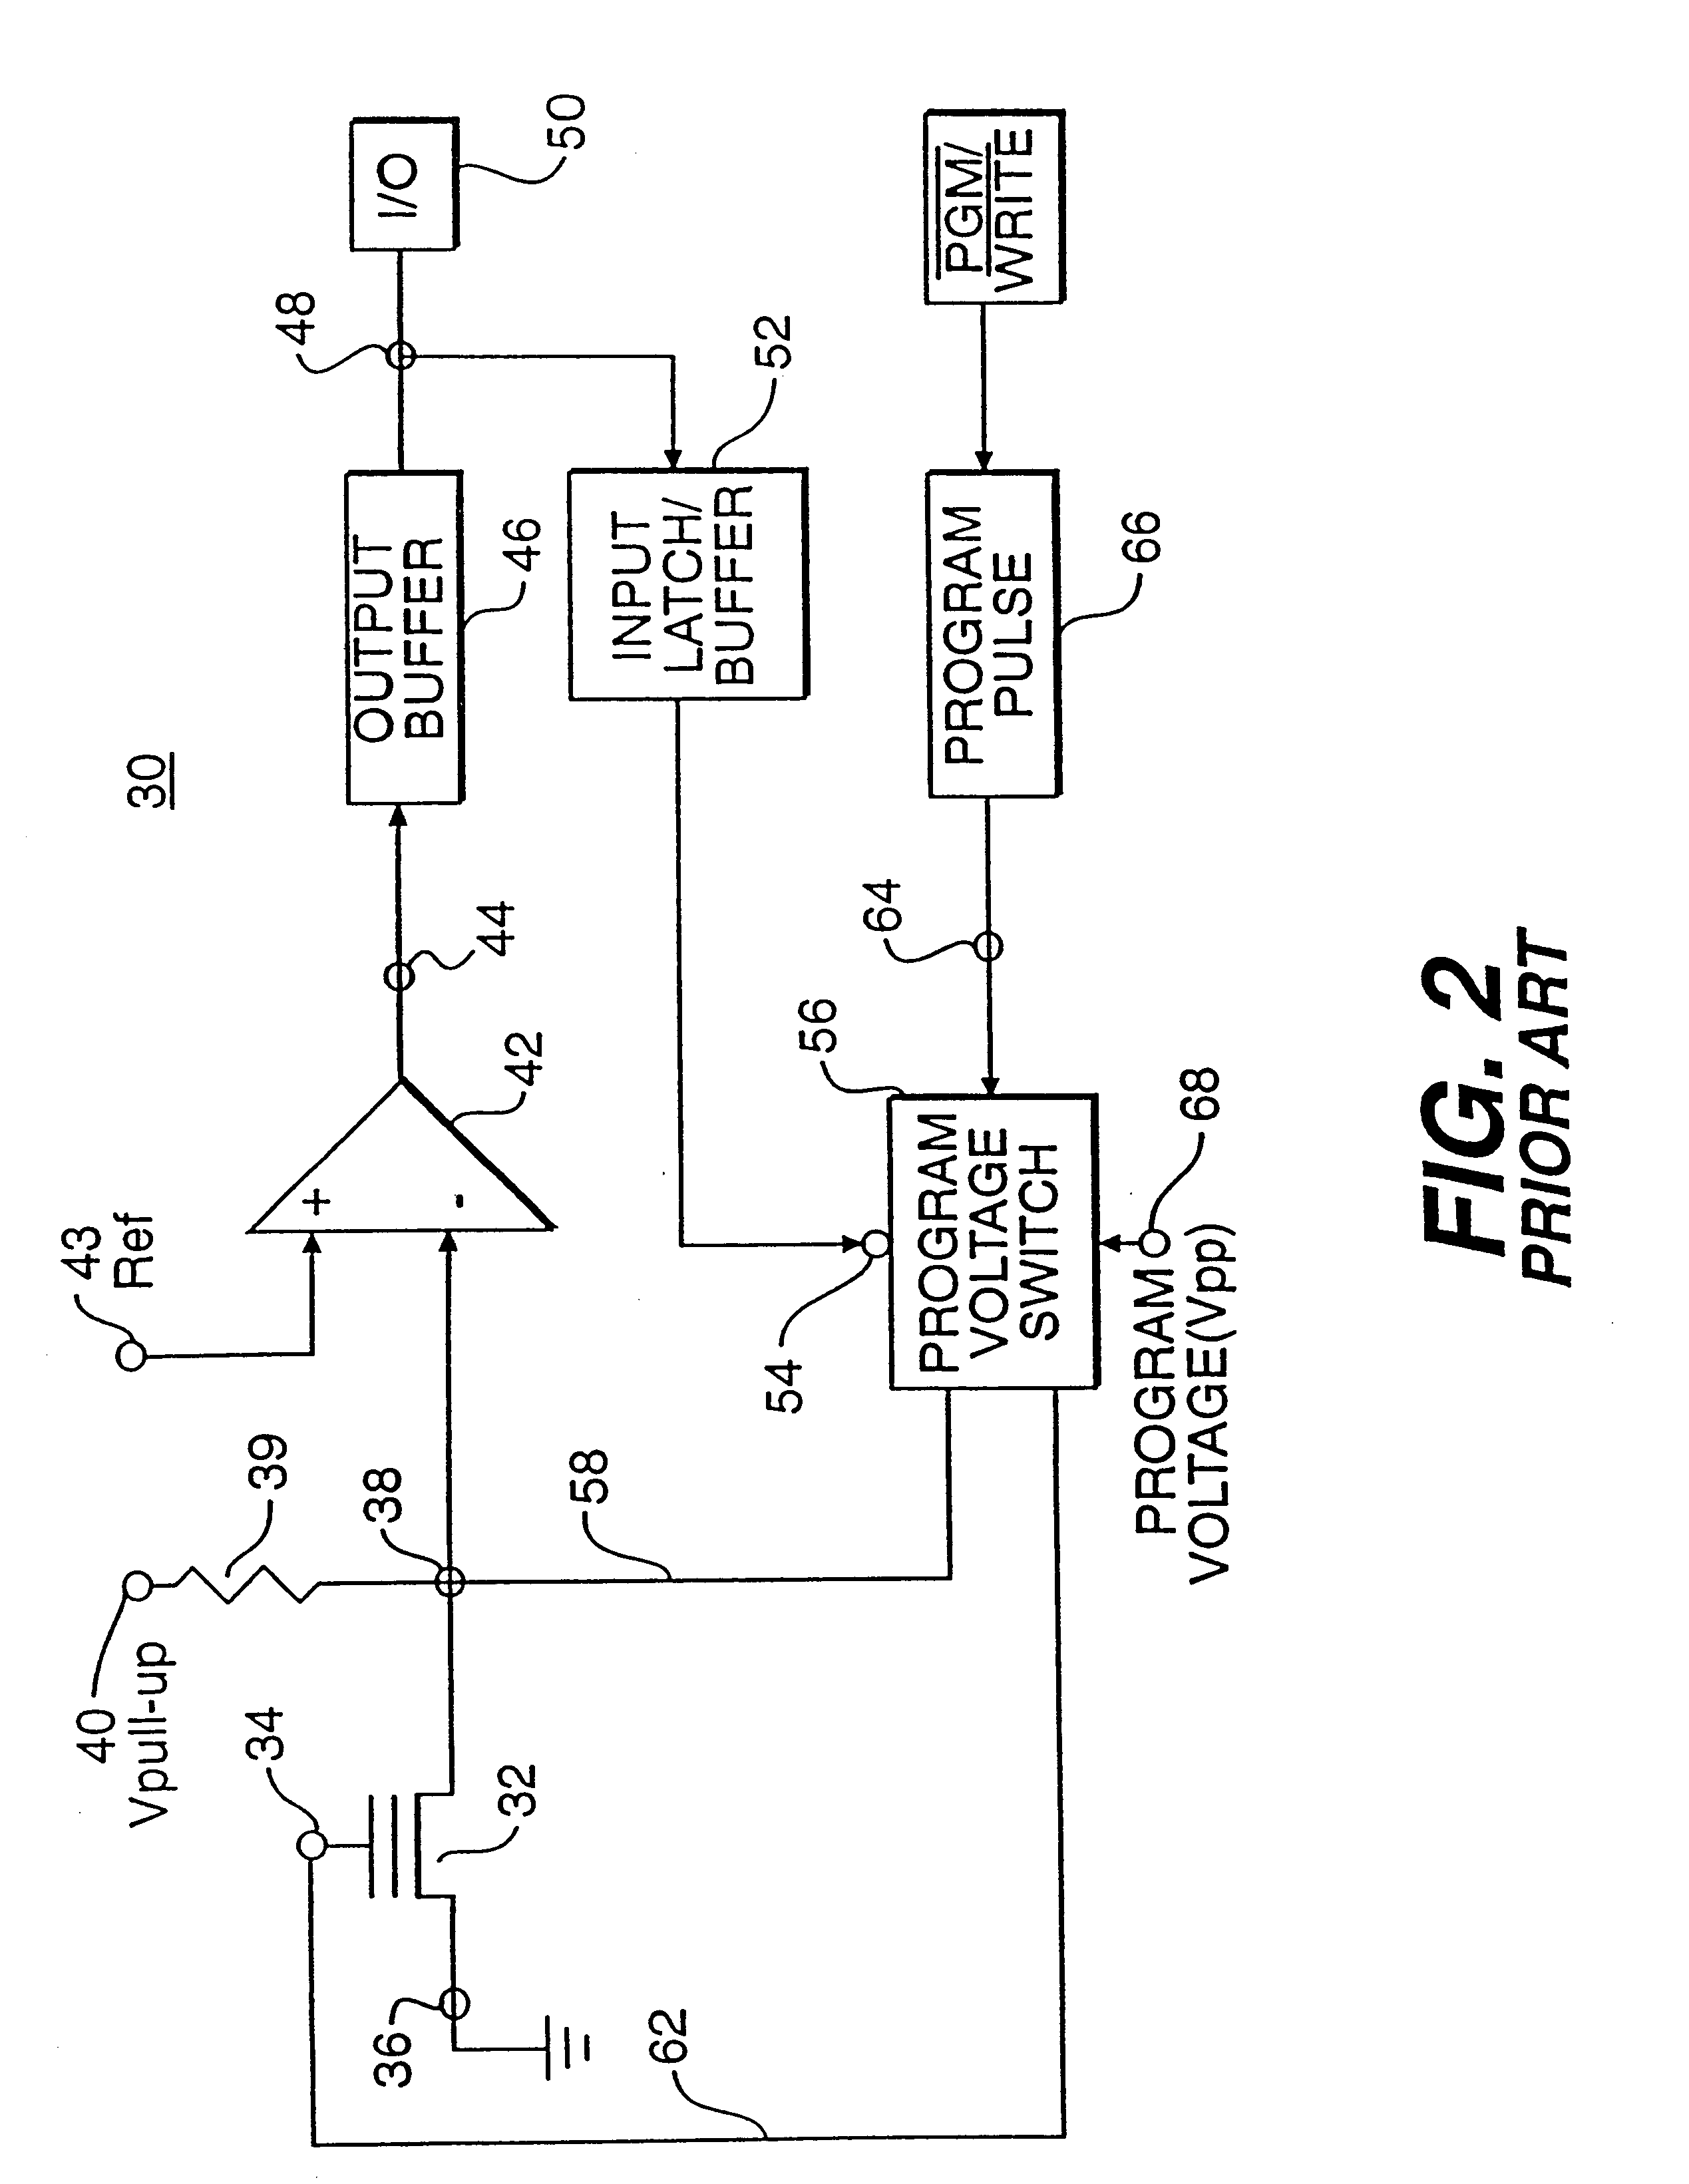 Memory apparatus including programmable non-volatile multi-bit memory cell, and apparatus and method for demarcating memory states of the cell